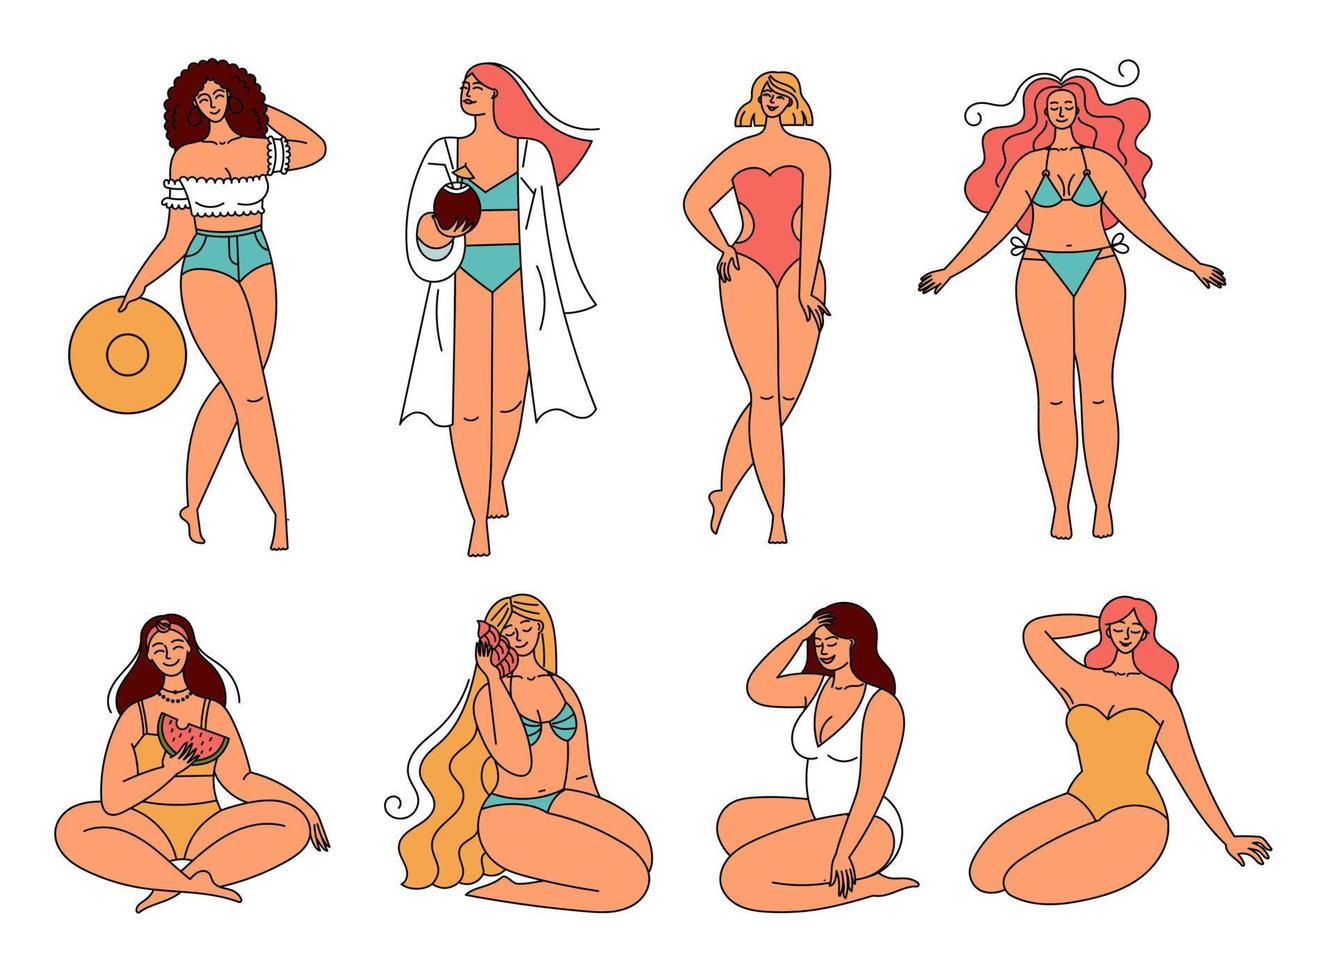 Set of girls in swimsuits, summer beach collection. Women on vacation. Body positivity and self-love. Beautiful people. Doodle style illustration vector